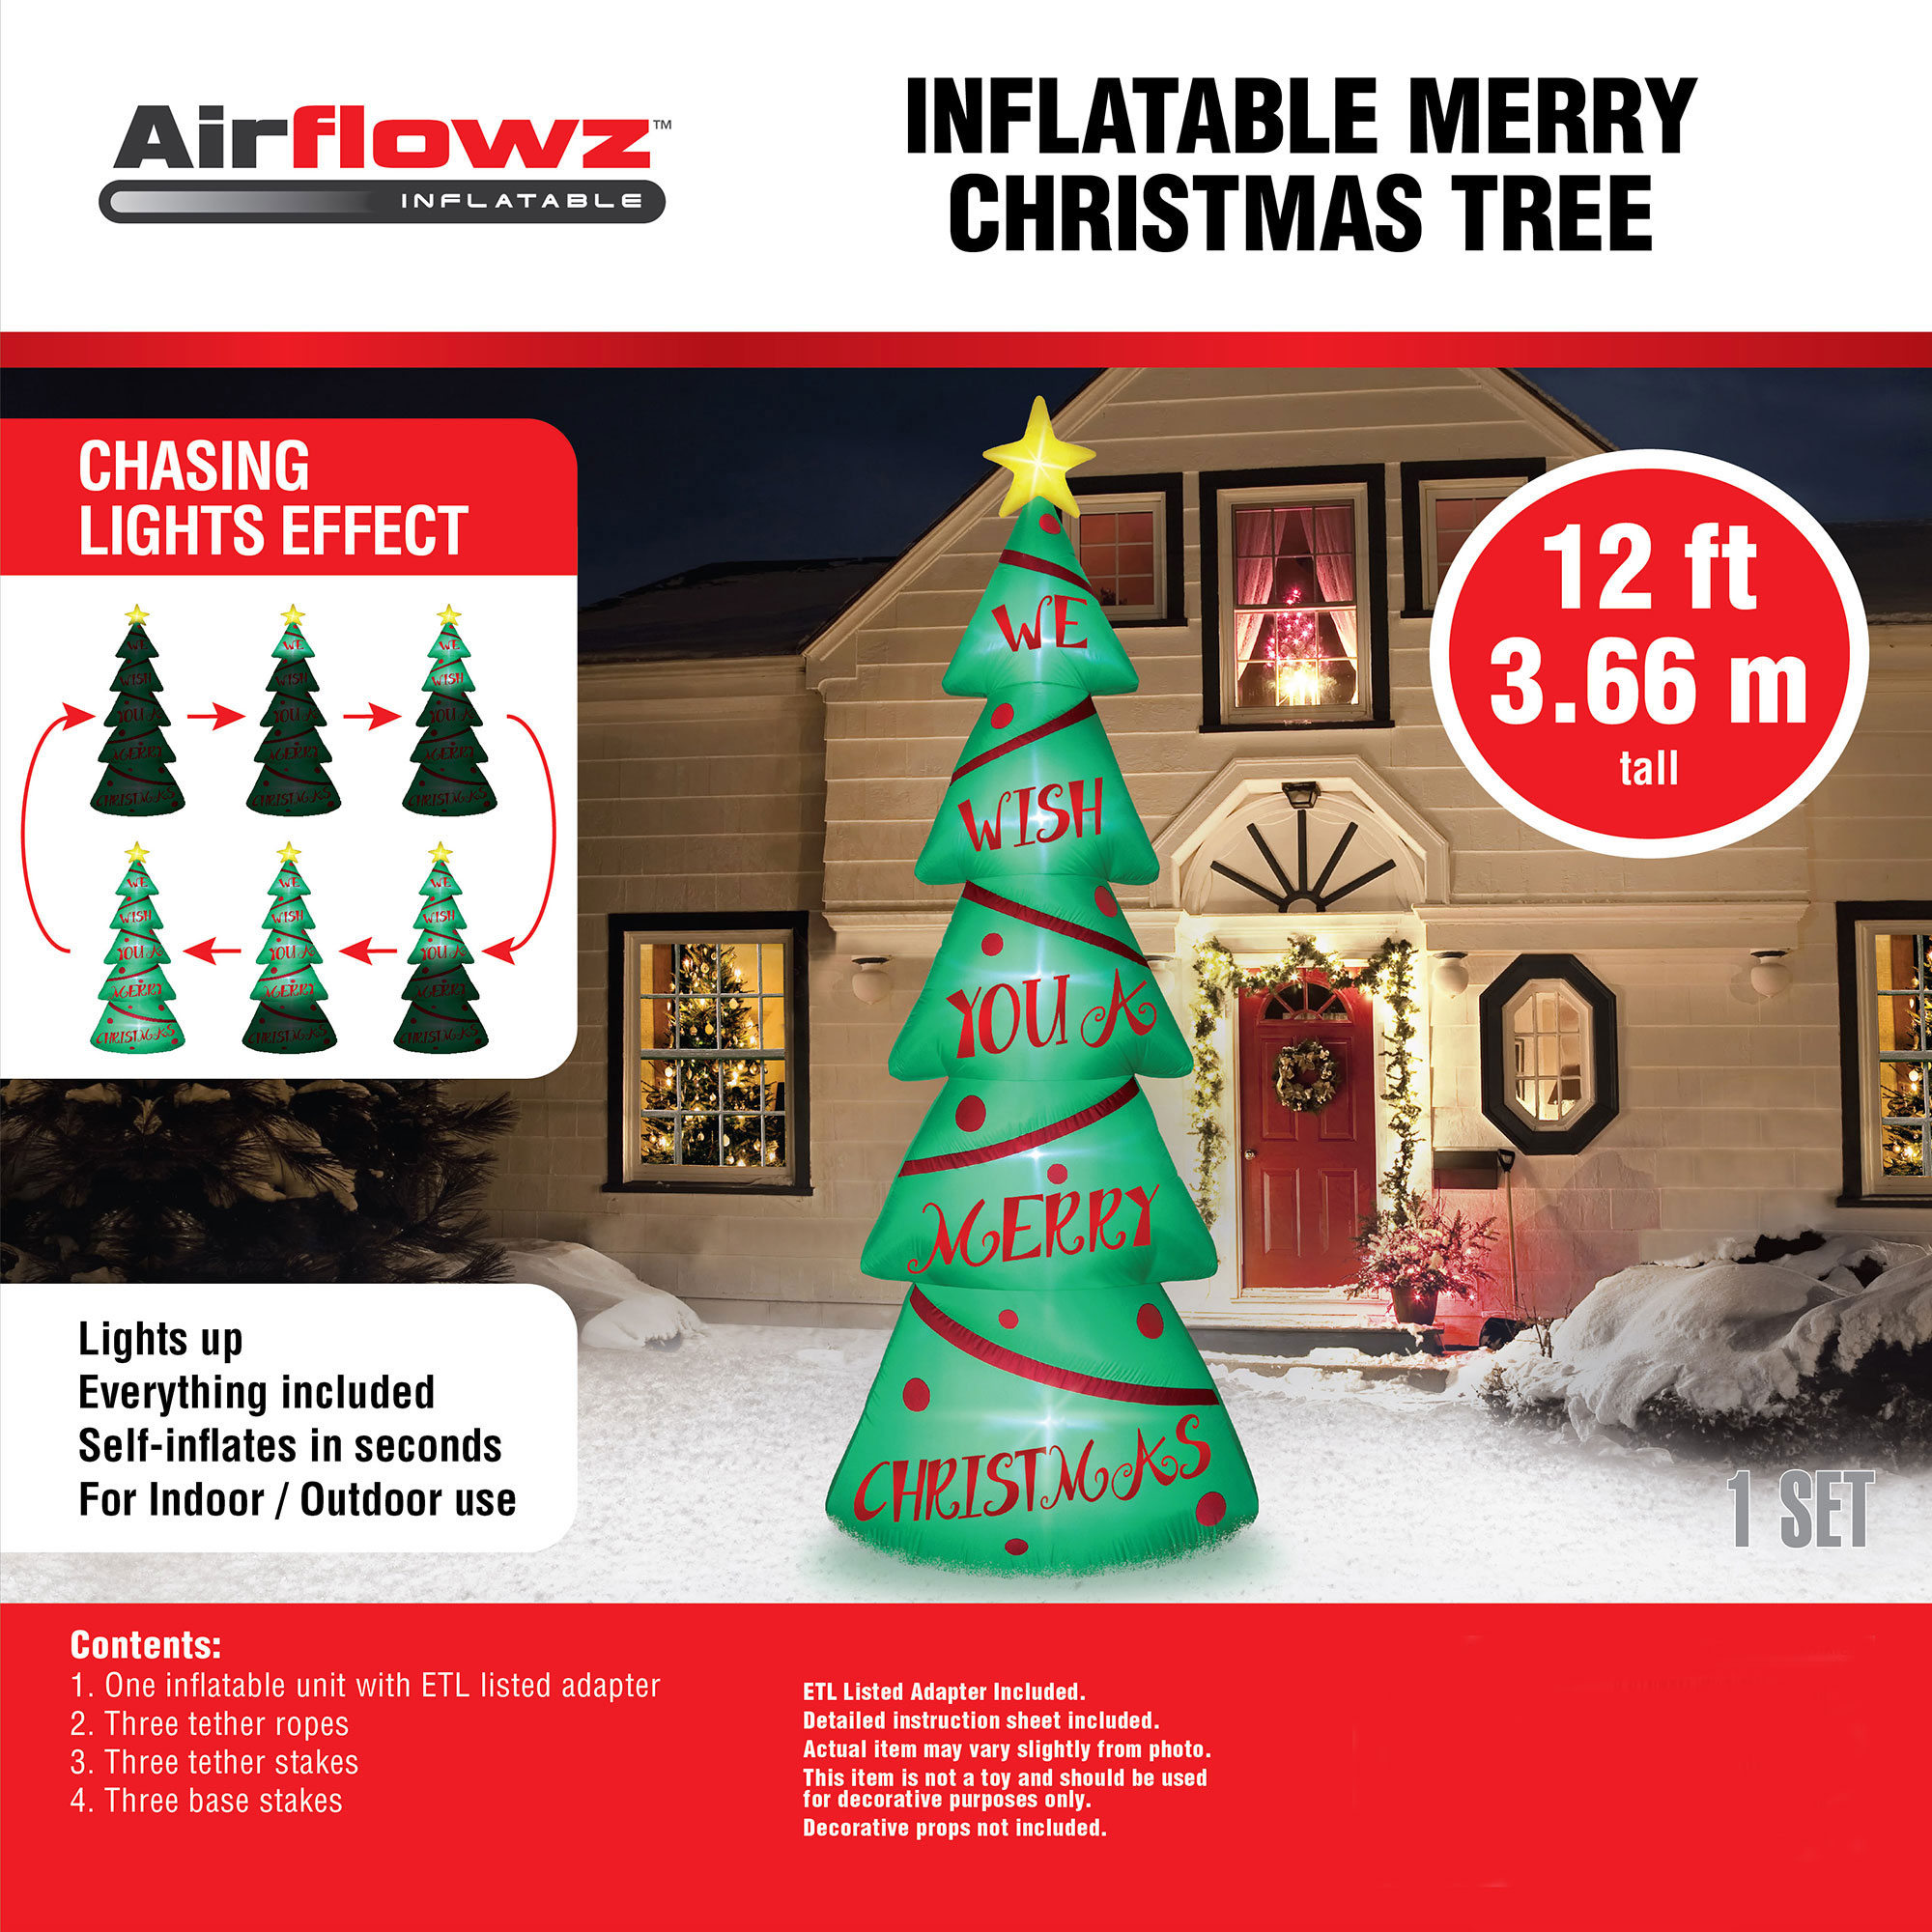 Airflowz 12 Foot Light Parade Inflatable Christmas Tree with Built In LED Lights | eBay